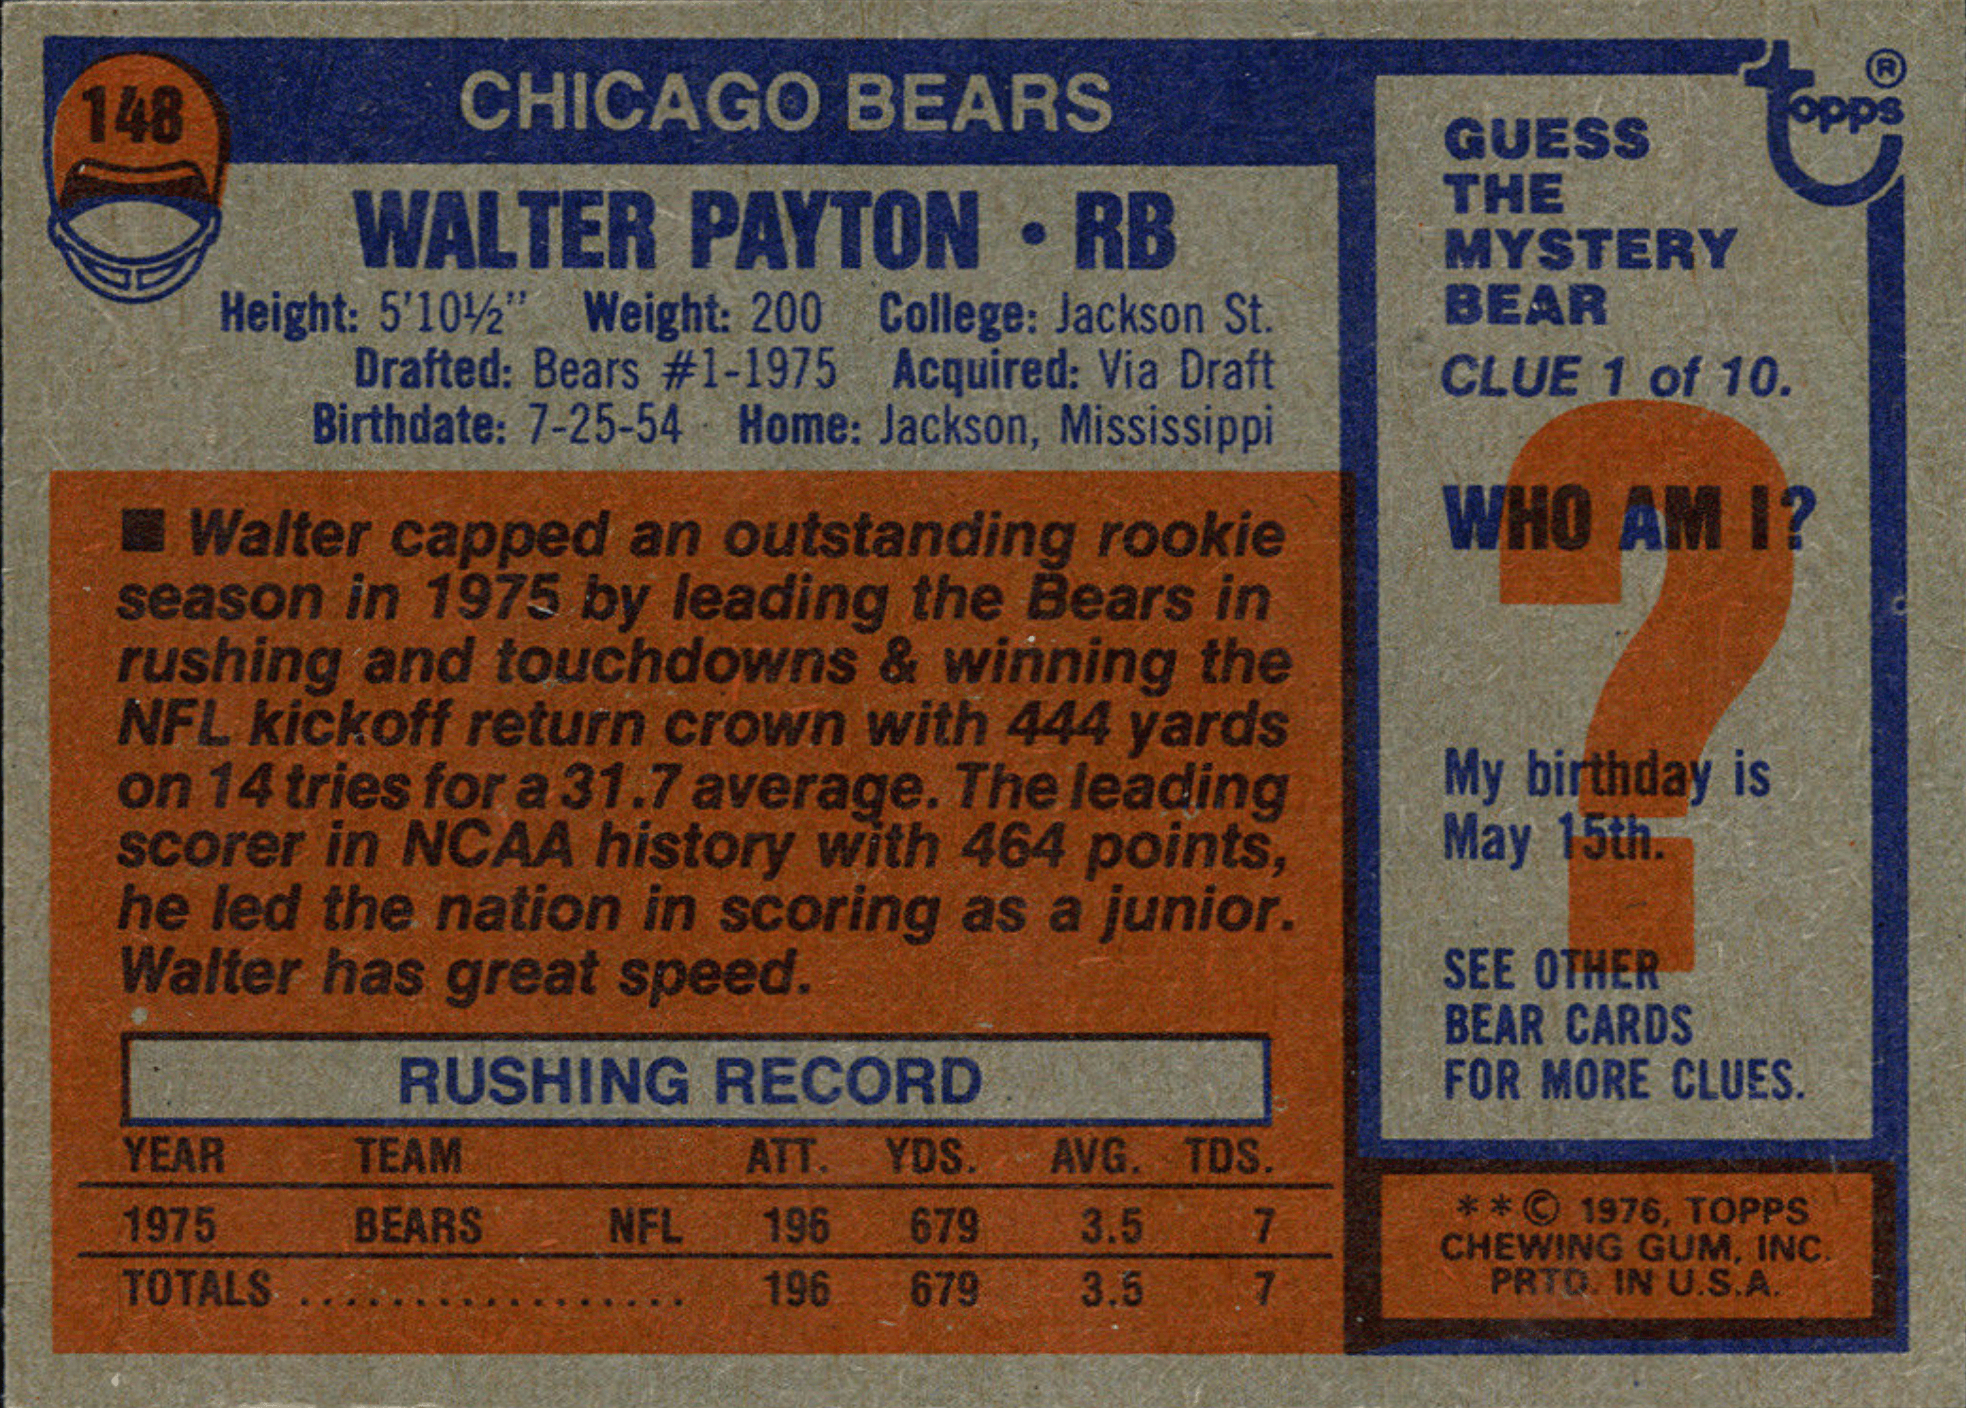 1976 Topps #148 Walter Payton Football Card Reverse With Statistics and Biography